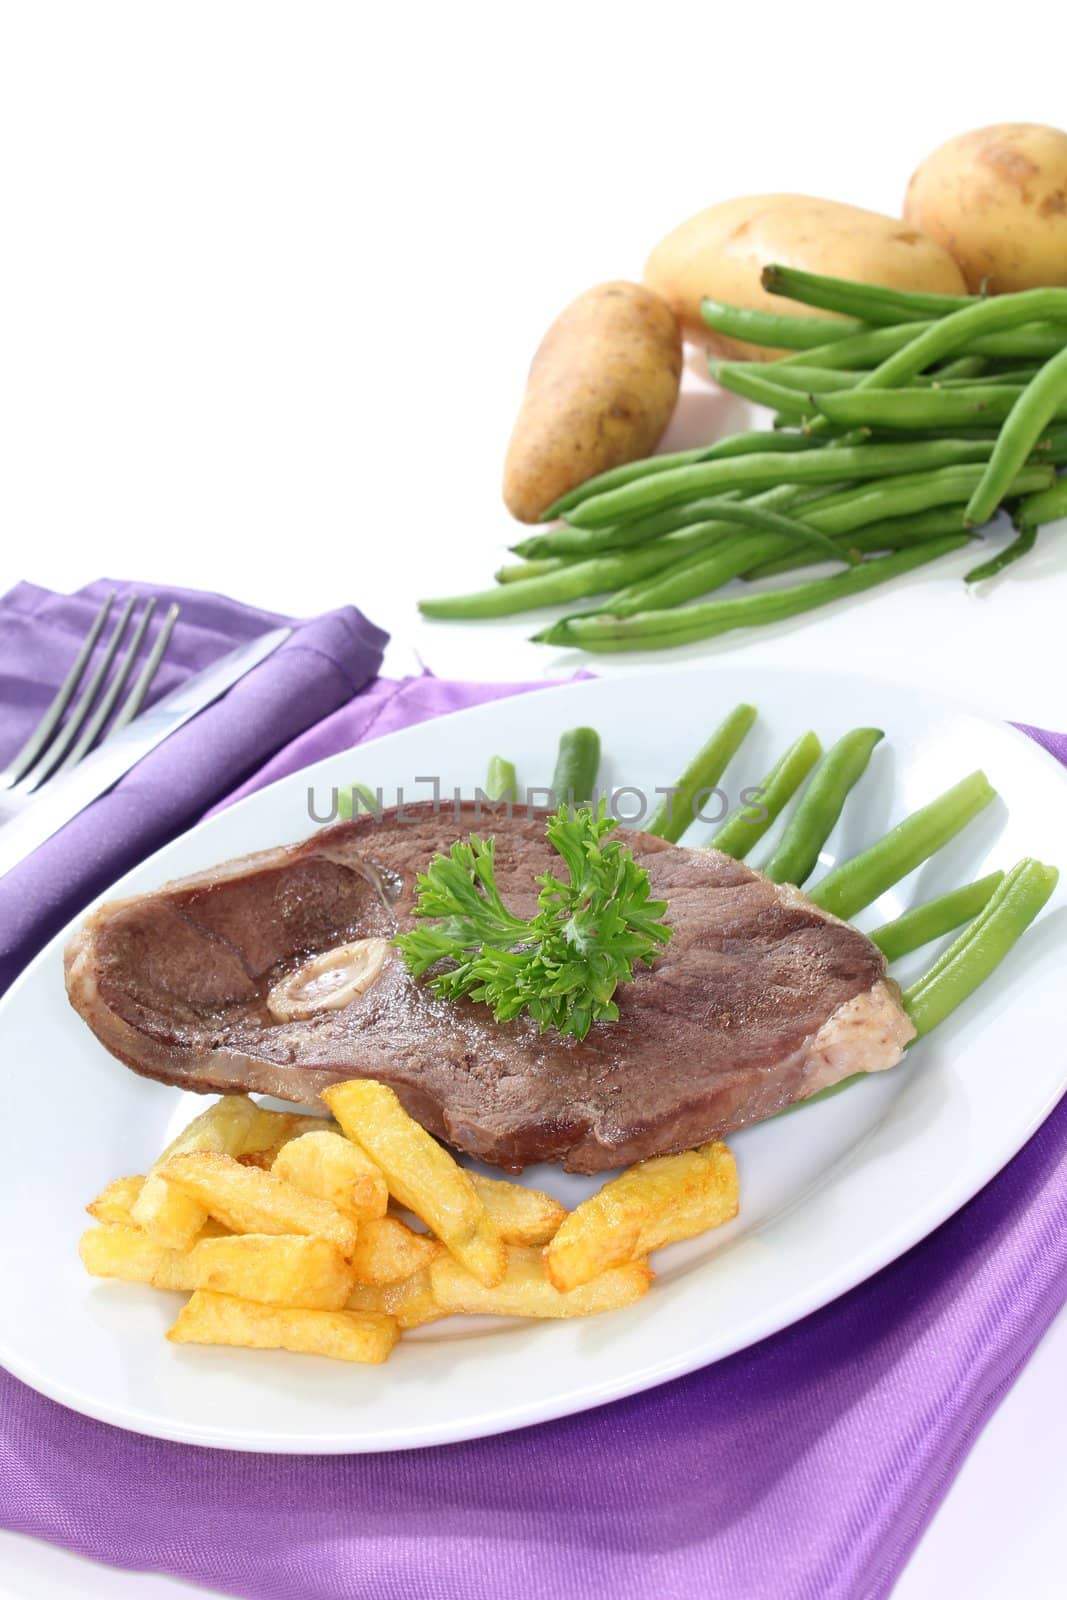 a slice of leg of lamb with green beans and french fries
